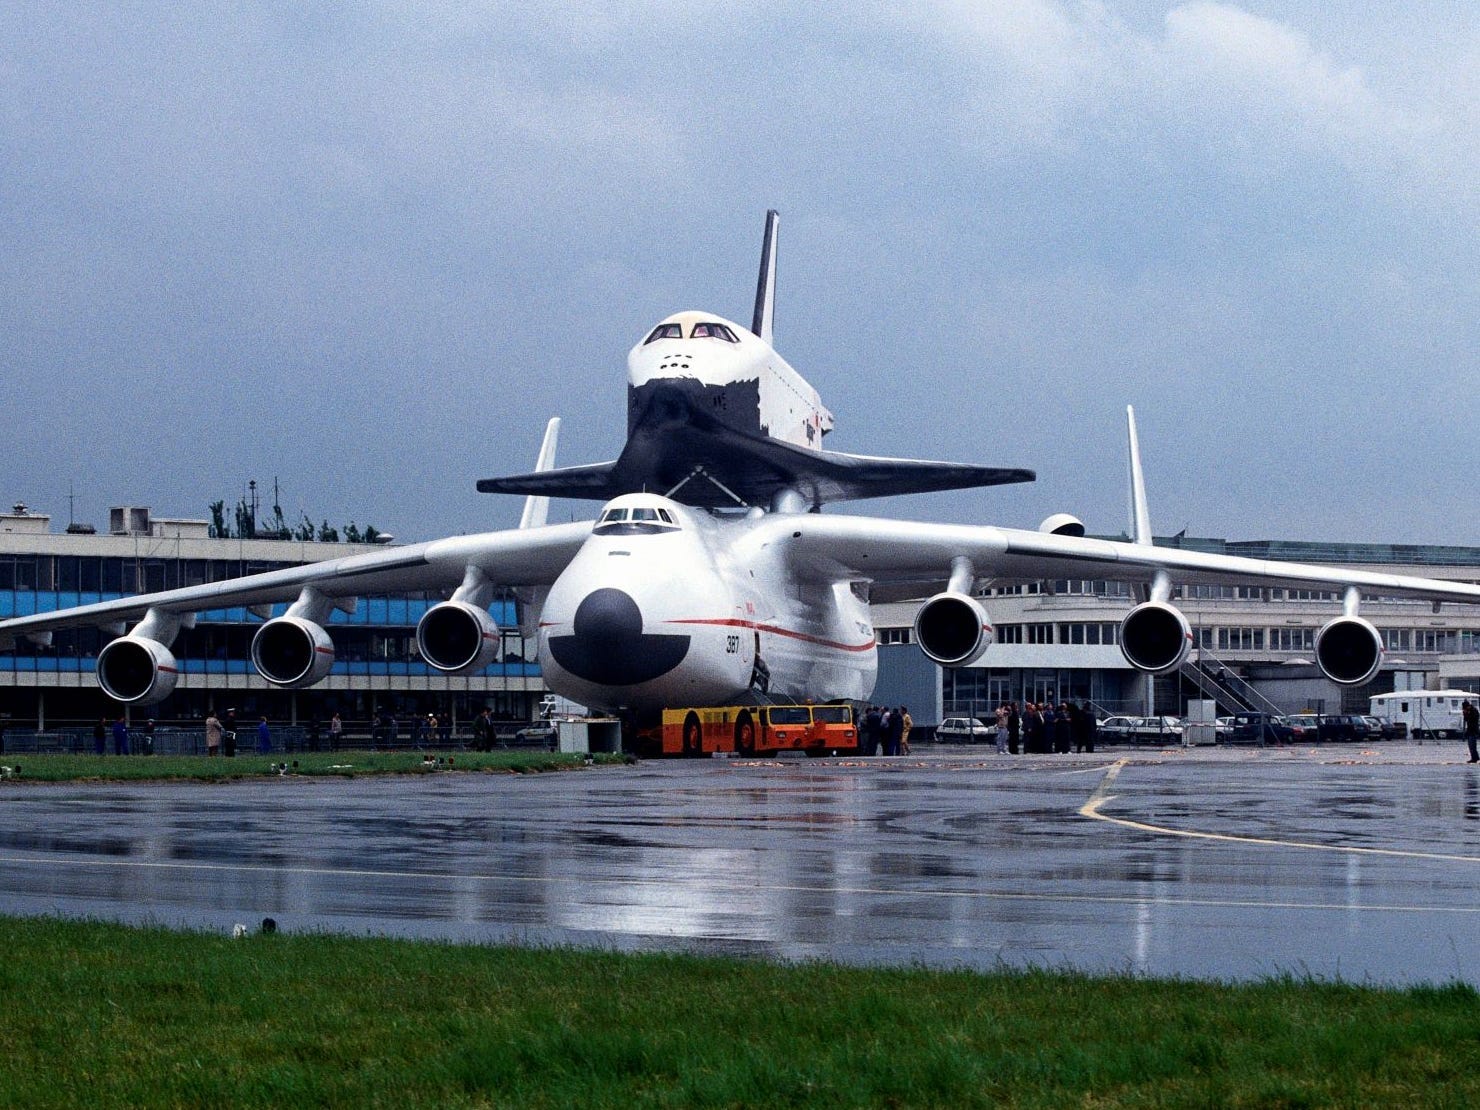 The An-225 with the Buran orbiter on its back at the Paris Air Show in 1989.